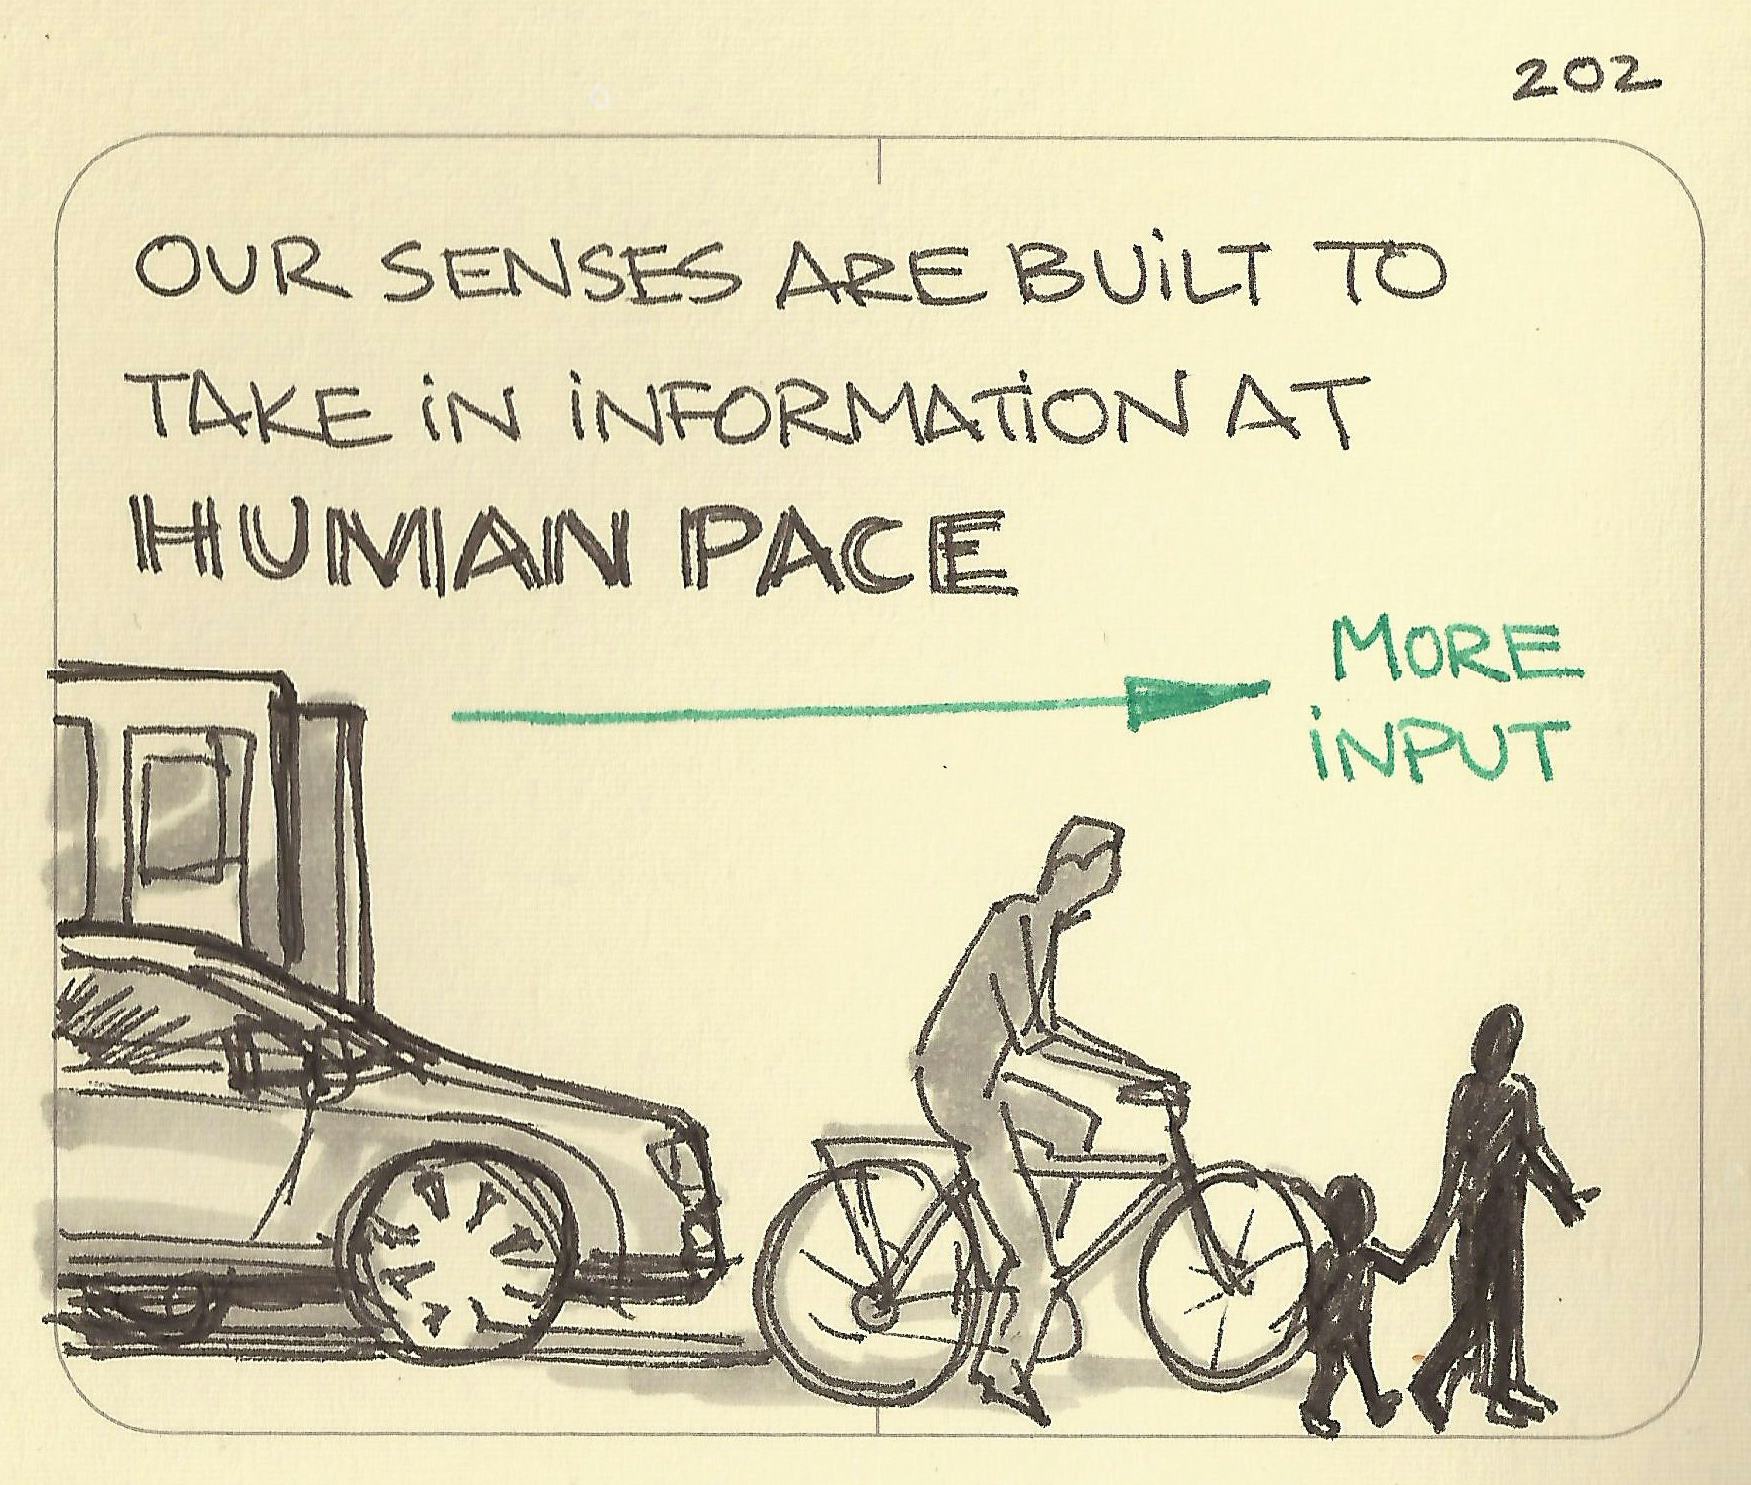 Our senses are built to take in information at human pace - Sketchplanations